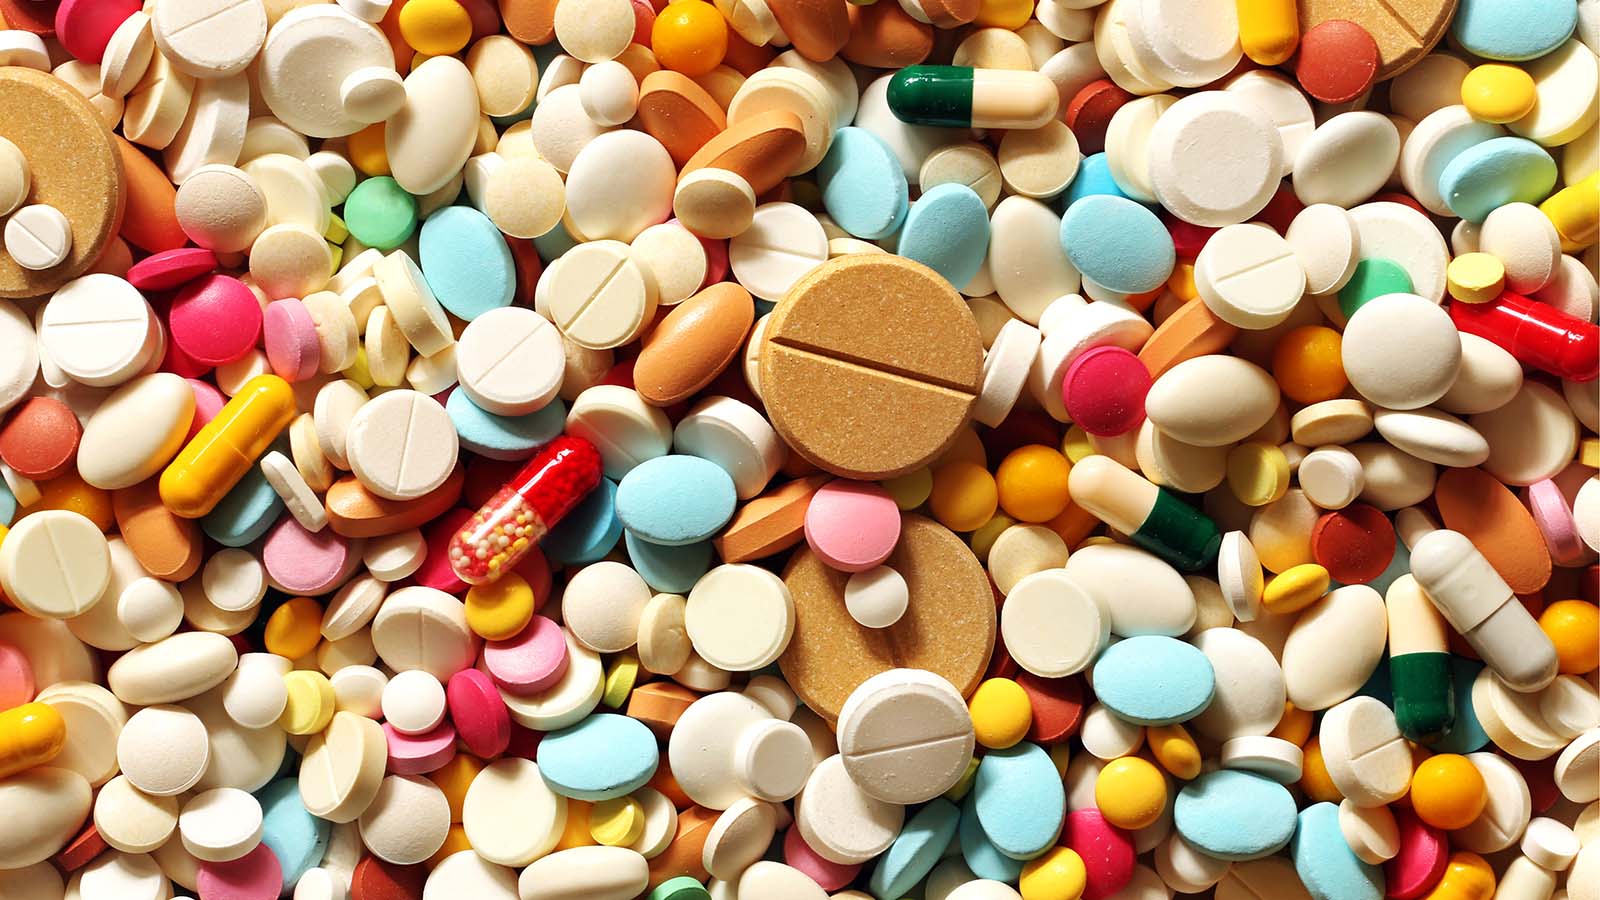 A pile of brightly colored pills in varying sizes and shapes representing RLMD stock.